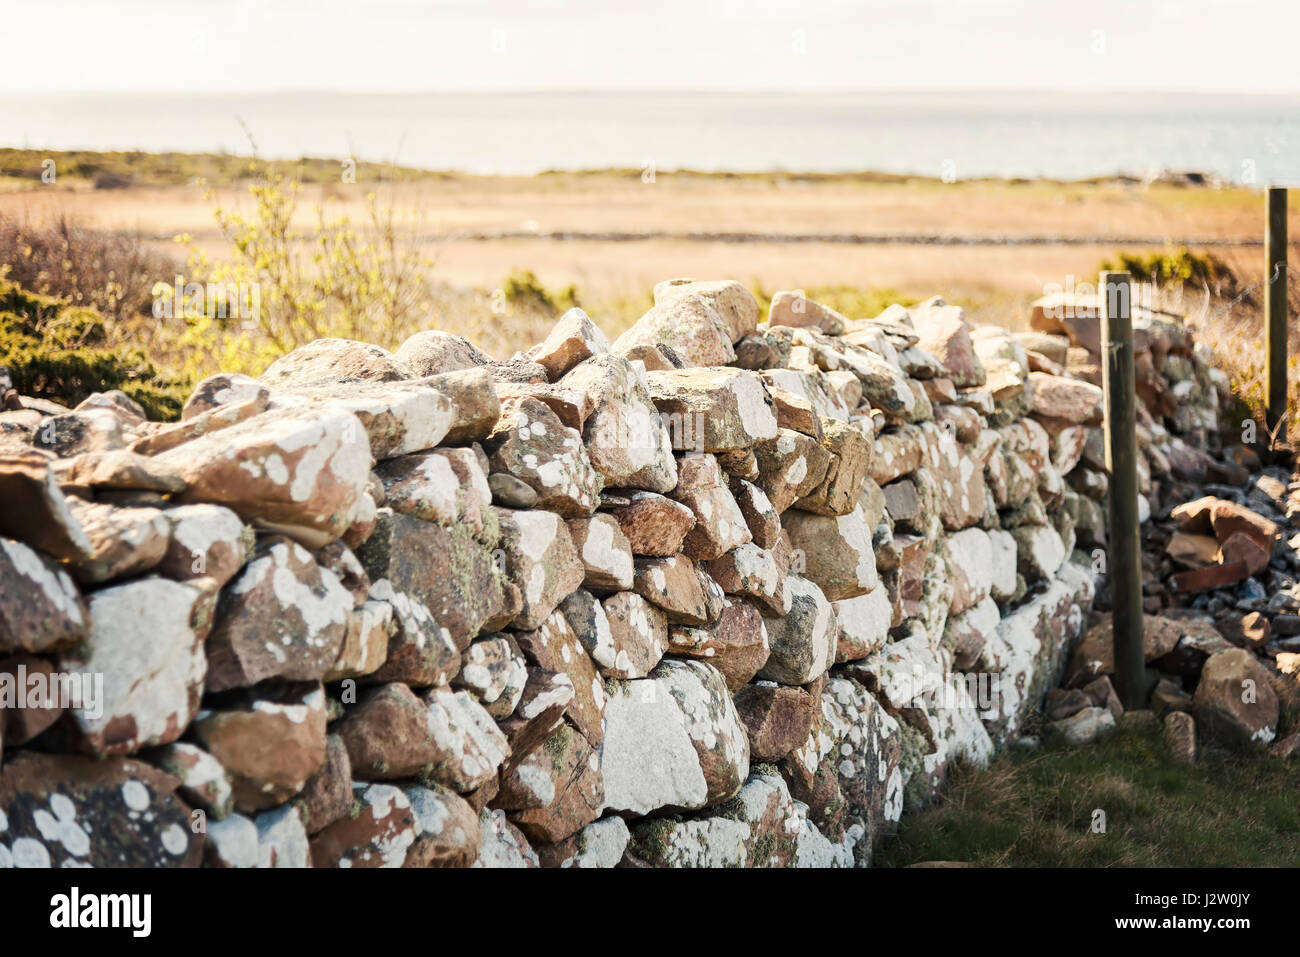 Image of natural stone wall by beach. Stock Photo